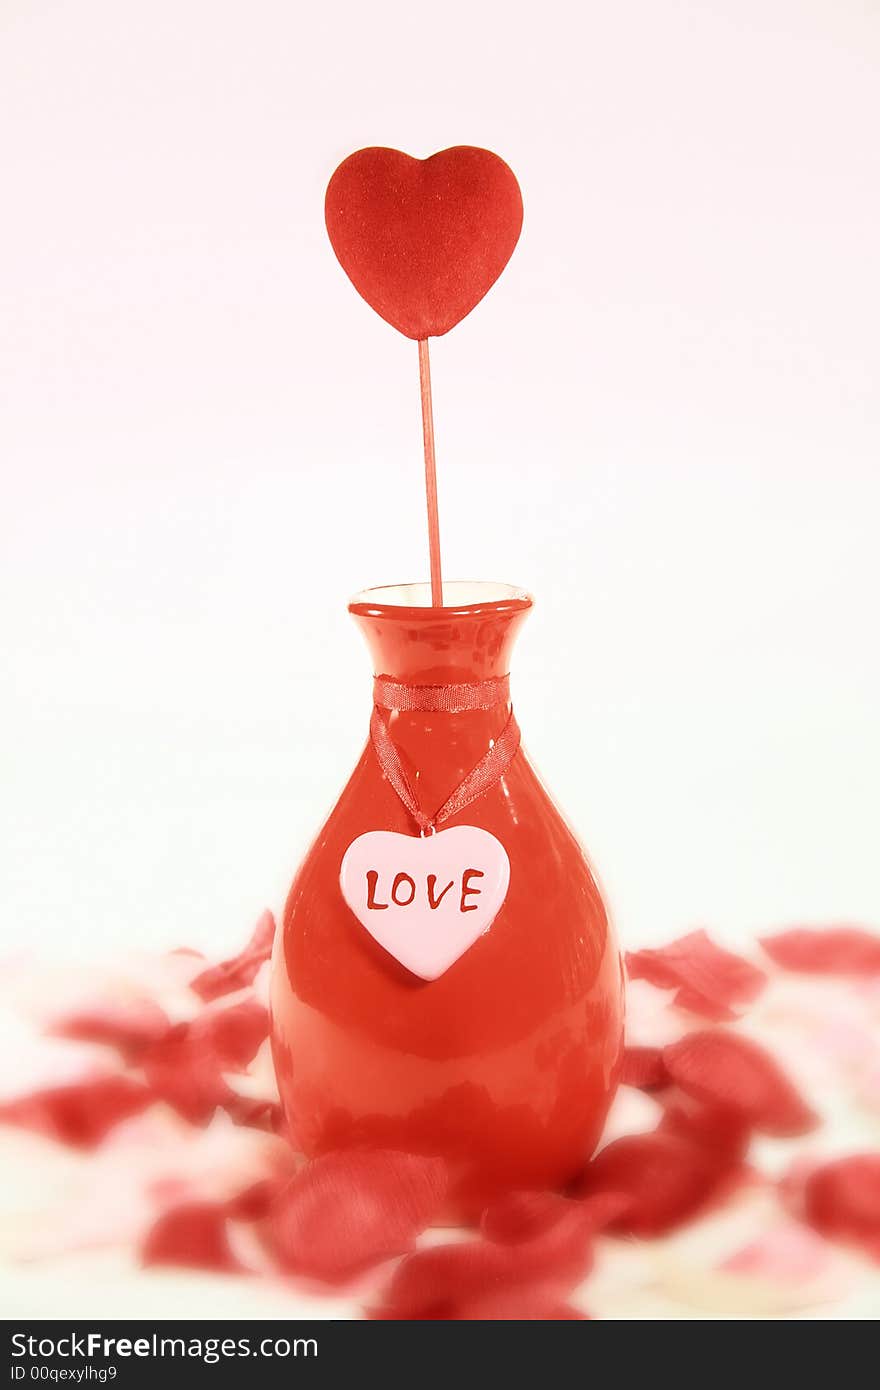 A red heart in a coordinating vase with love tag surrounded by rose petals with a gradated pale pink background. A red heart in a coordinating vase with love tag surrounded by rose petals with a gradated pale pink background.